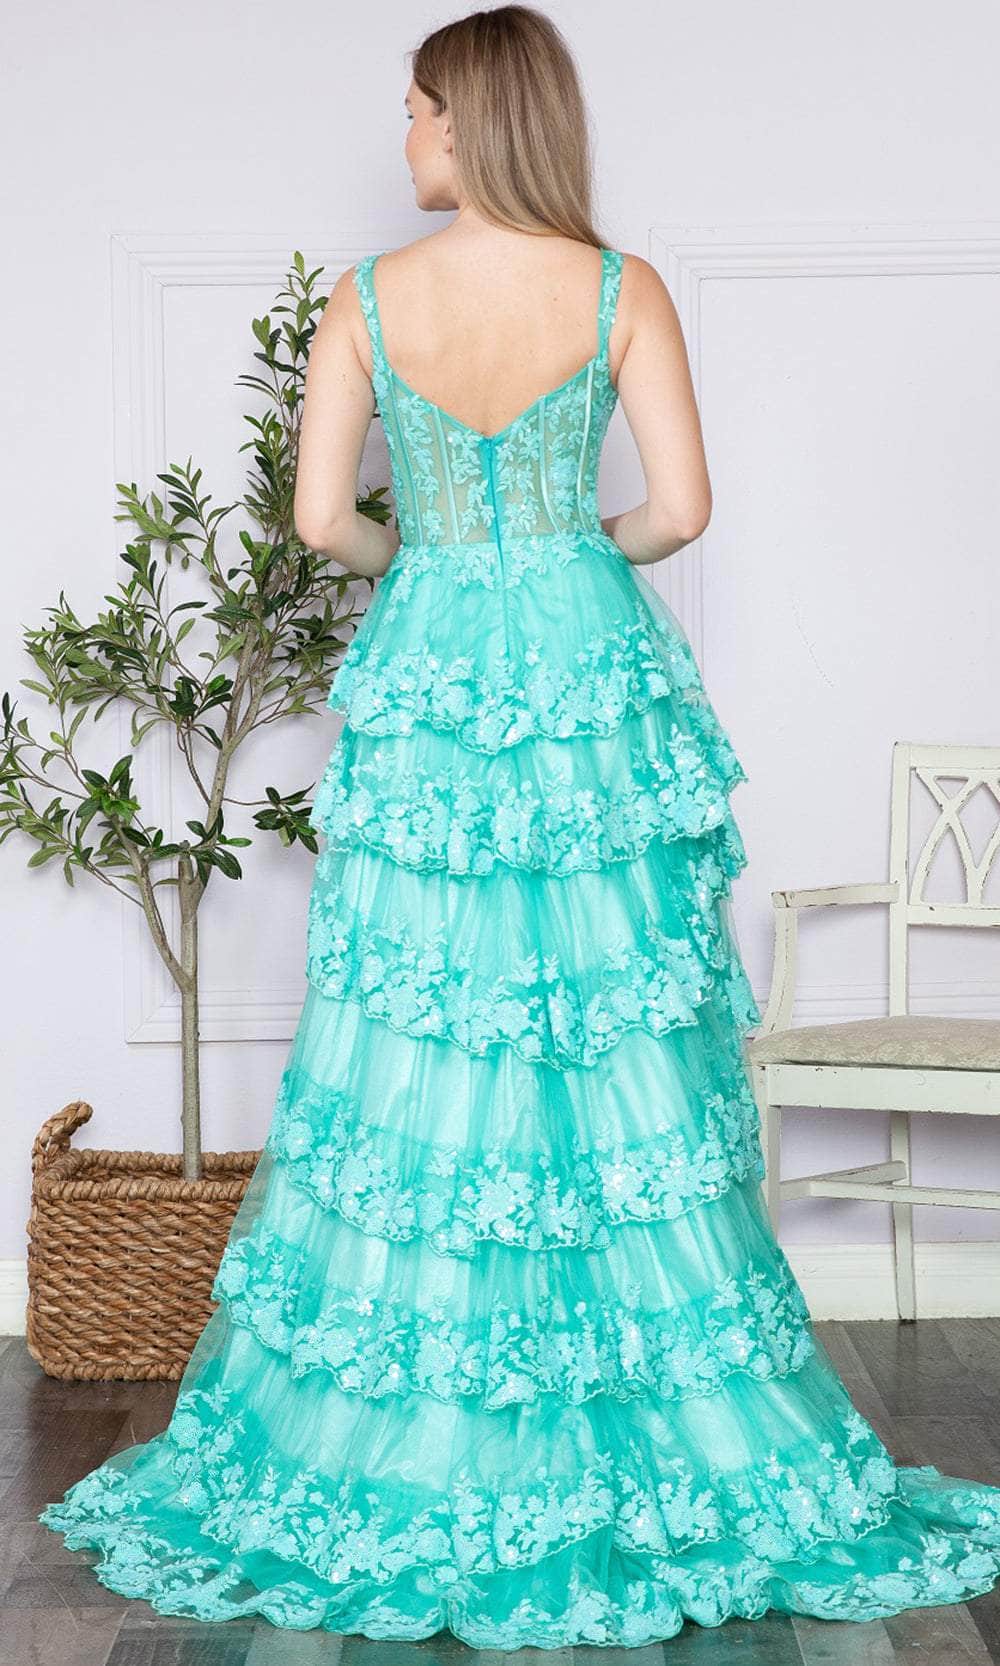 Poly USA 9410 - Tiered Lace Prom Dress Prom Dresses